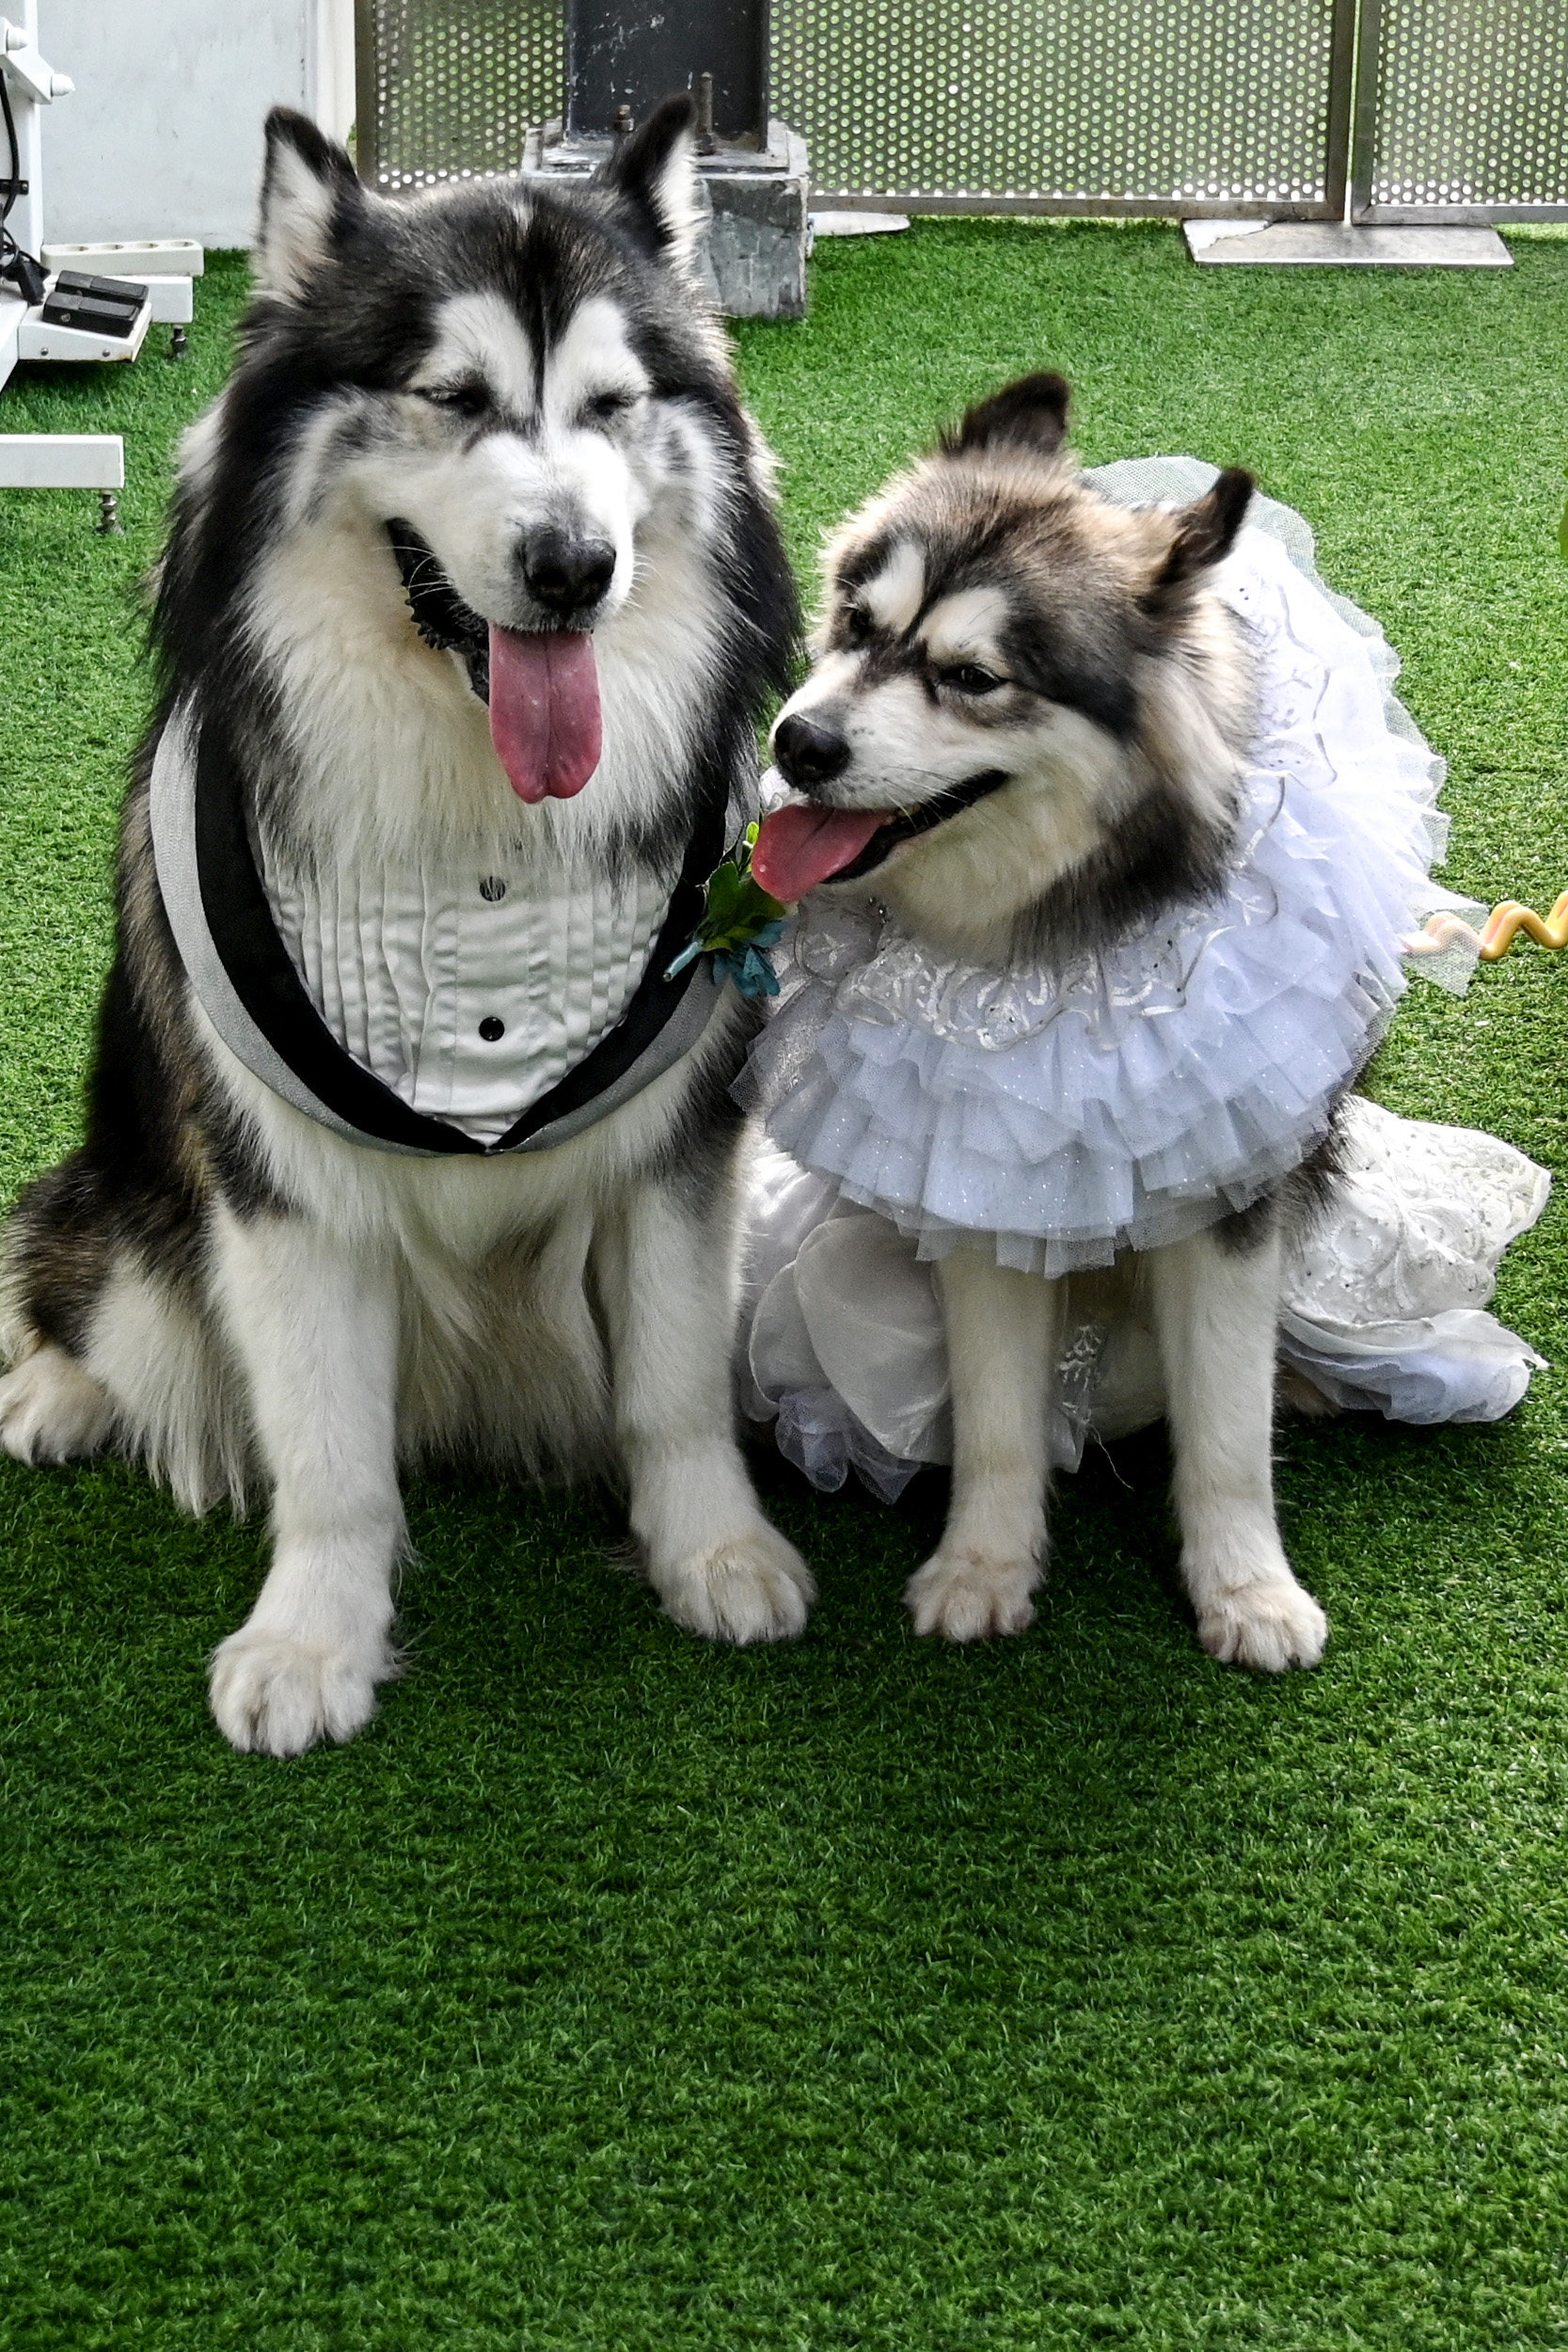 Dogs dressed as bride and groom during a dog wedding ceremony in Jakarta, Indonesia. Photo: Xinhua